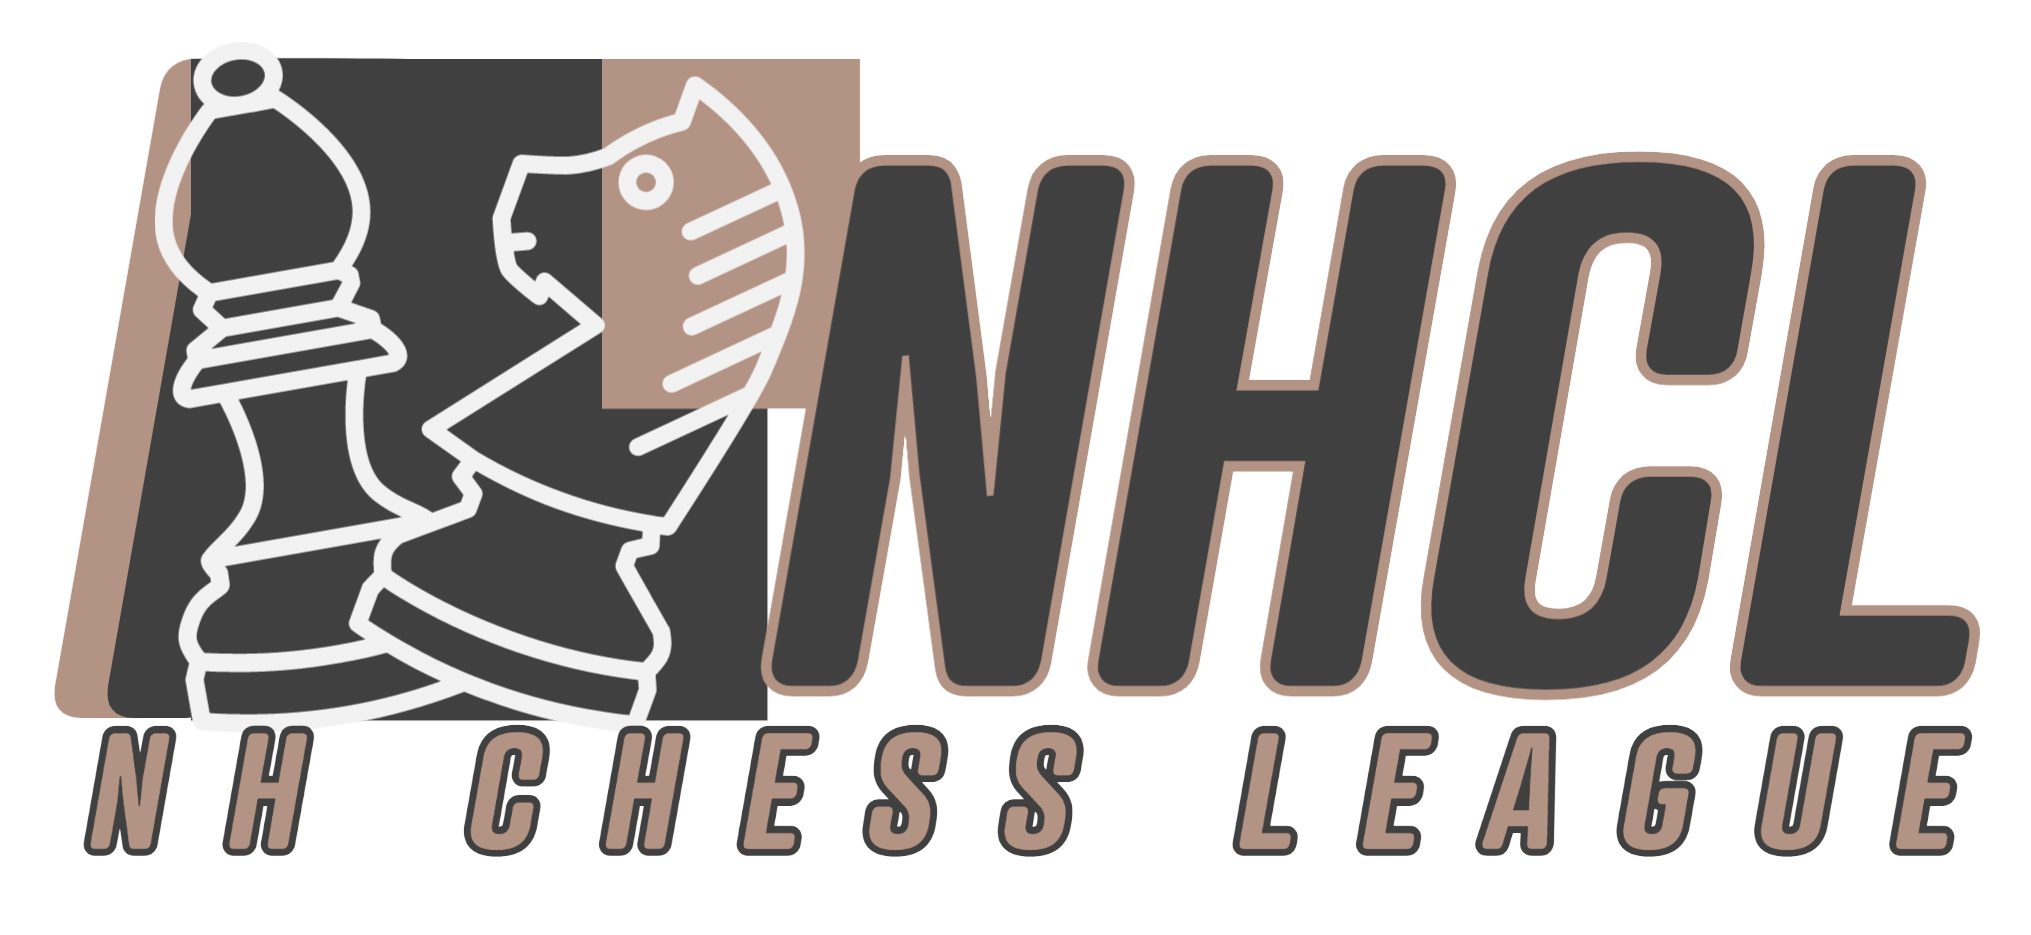 New Hampshire Chess League